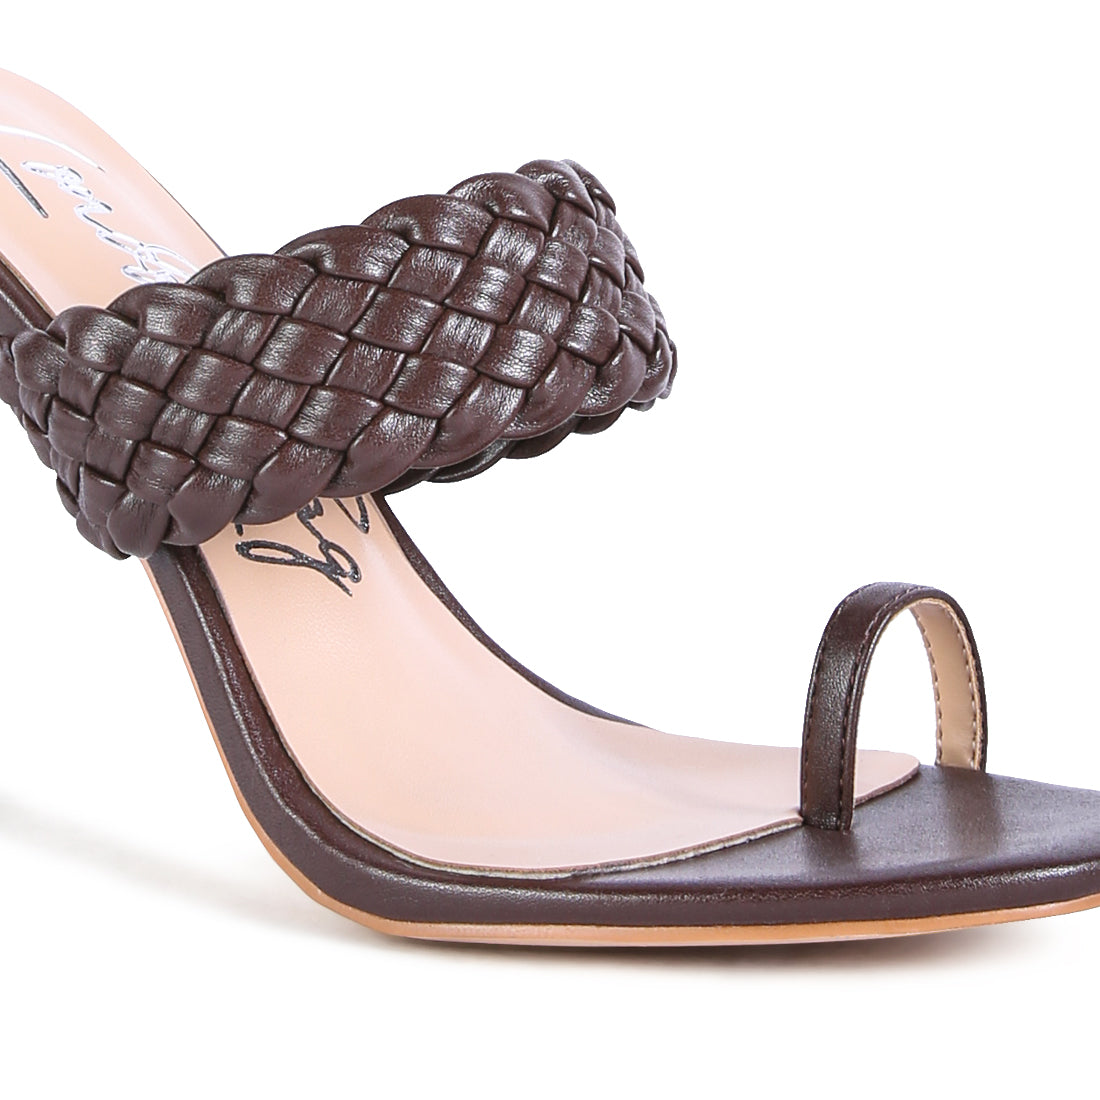 Woven Strap Toe Ring Sandals in Coffee